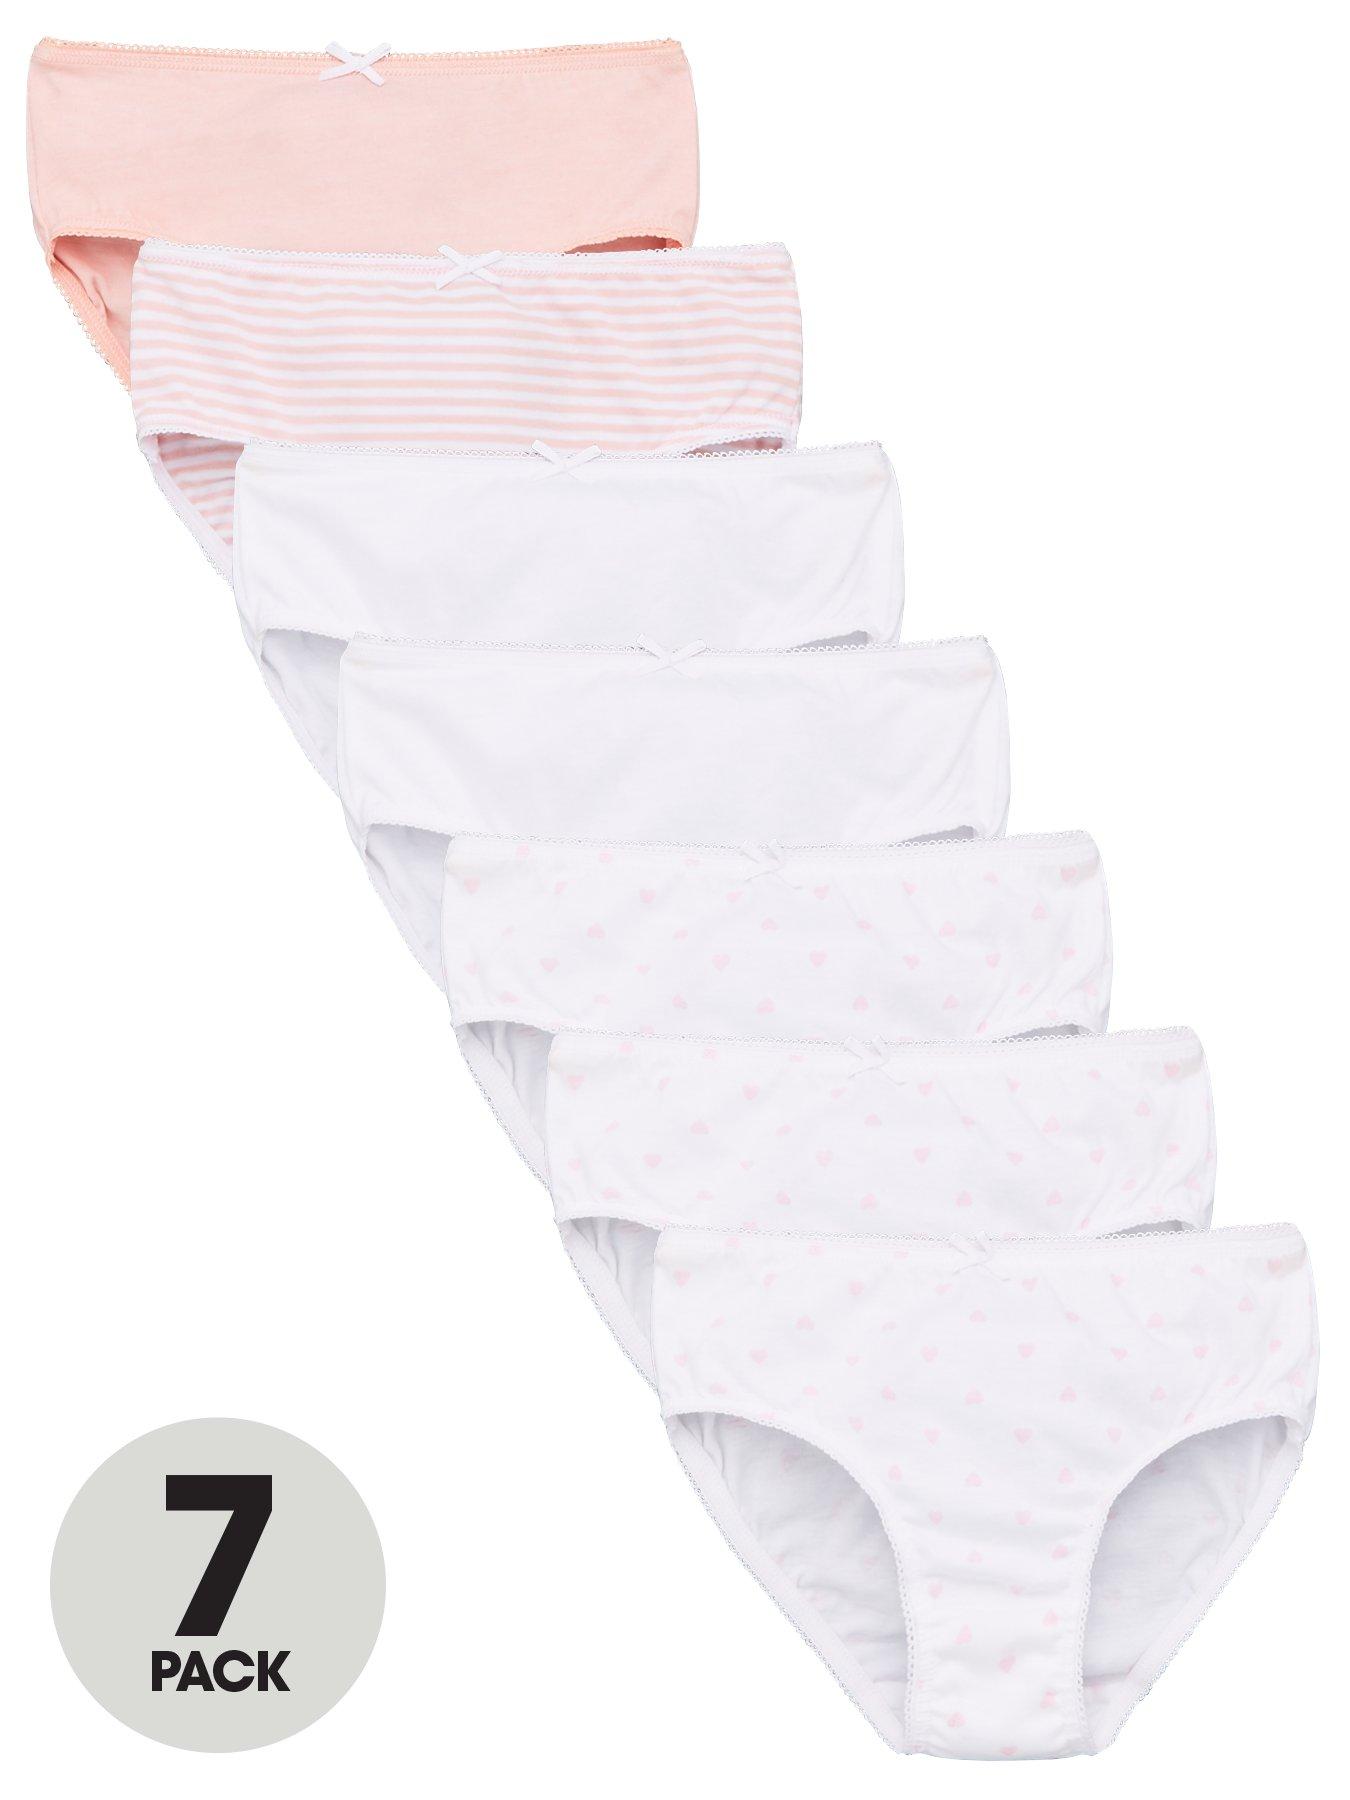 Rae Dunn 7 Pack Days of the Week Girls Underwear ( 6-7 yrs ) Small